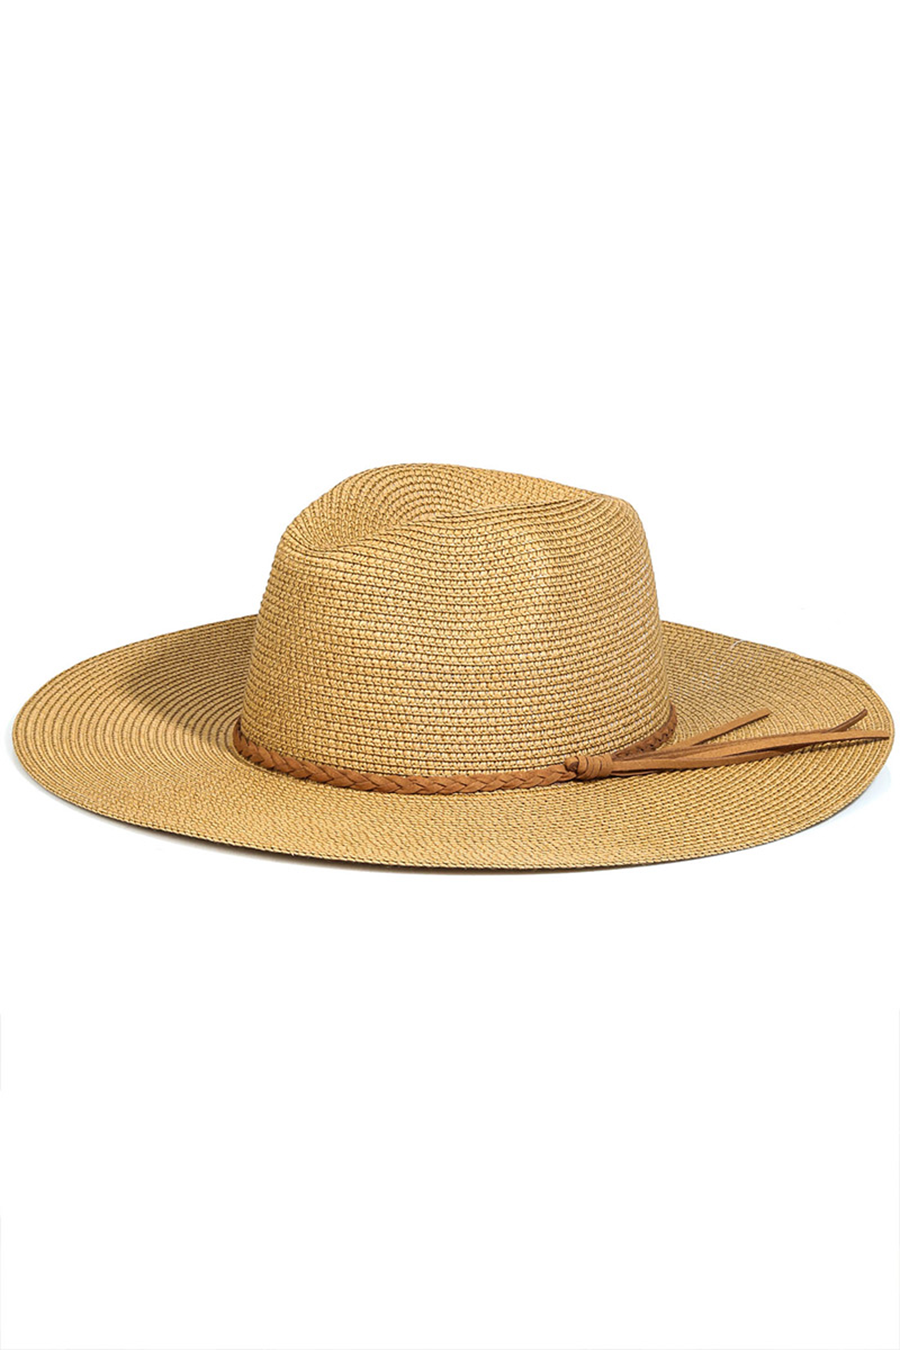 Braided Rope Straw Hat | Taupe - Main Image Number 1 of 1